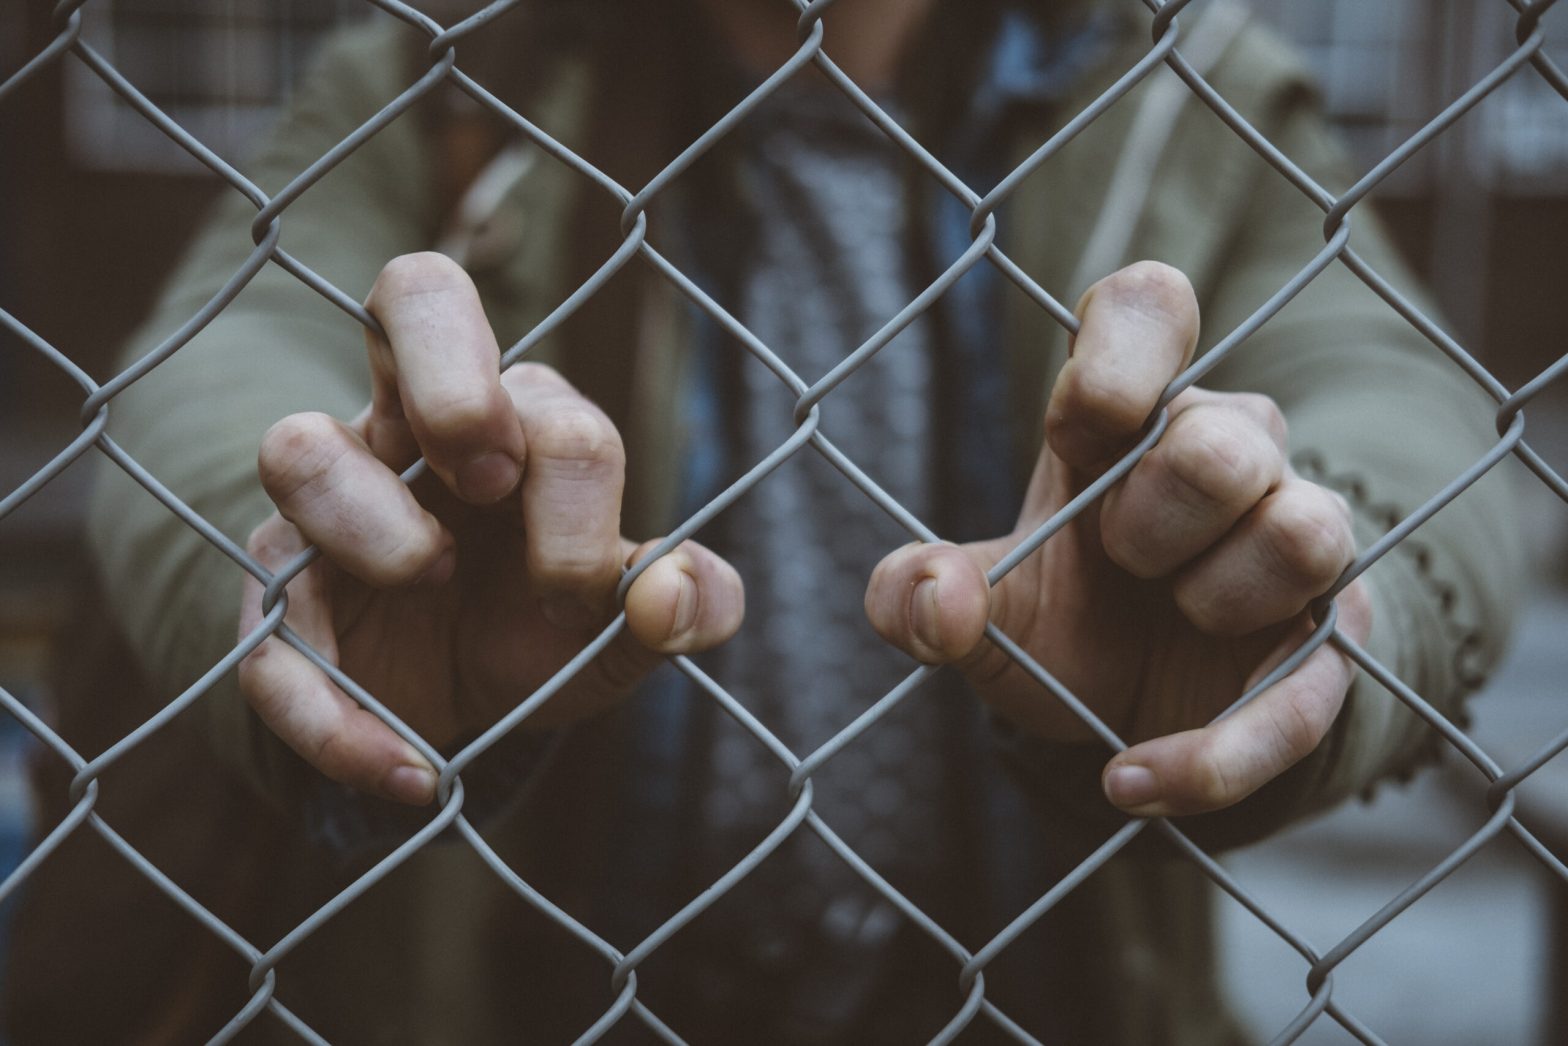 Macro view of an urban person's hand on a chain link fence. solitary confinement